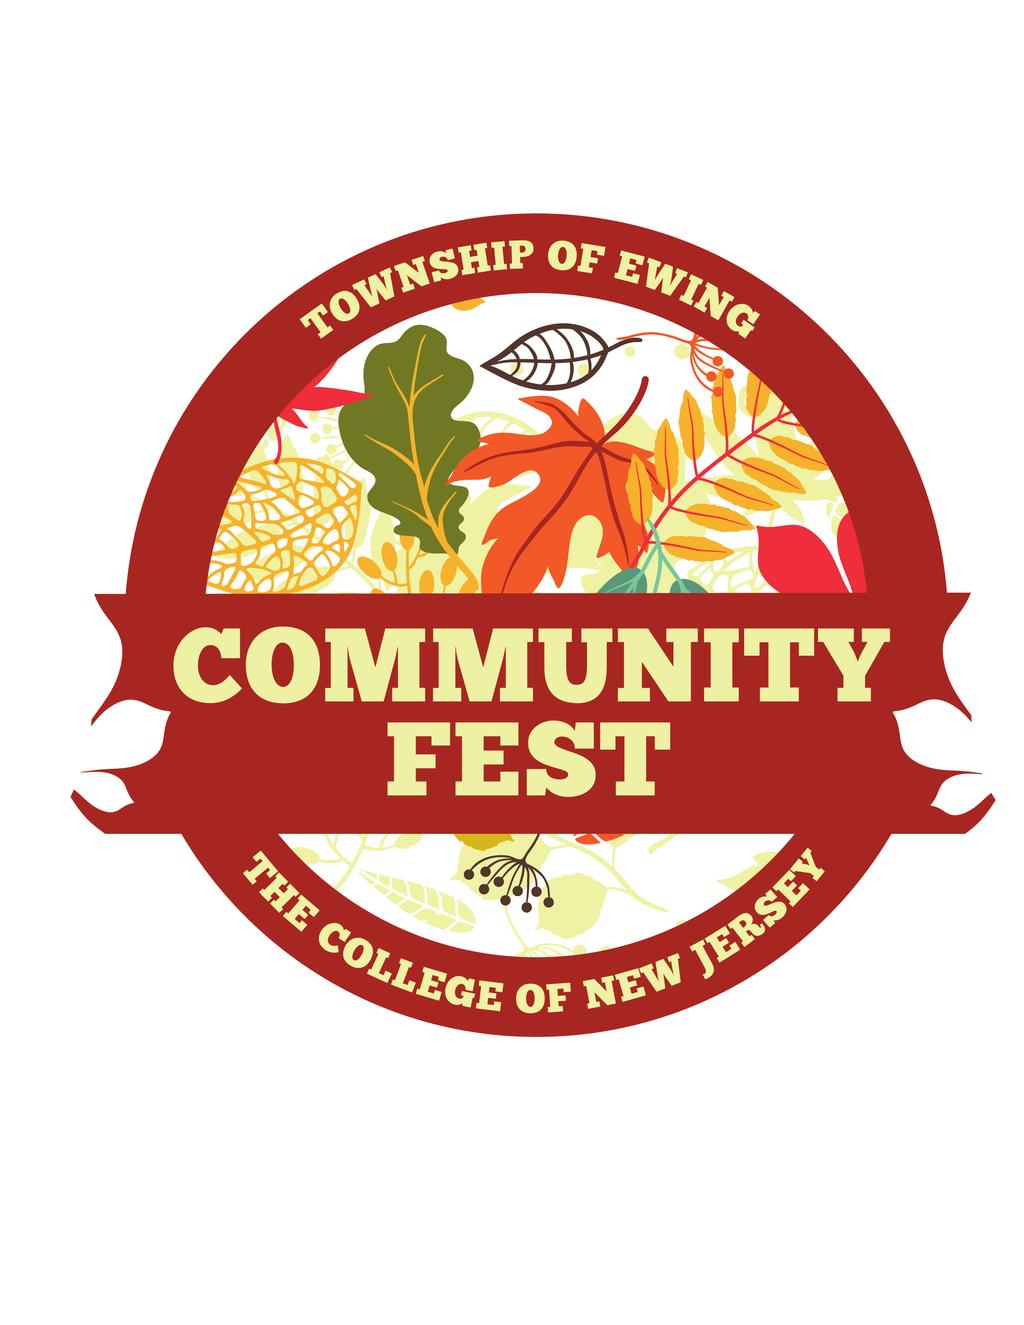 SATURDAY, SEPTEMBER 29, 2018 COMMUNITY FEST At THE COLLEGE OF NEW JERSEY 10 a.m.